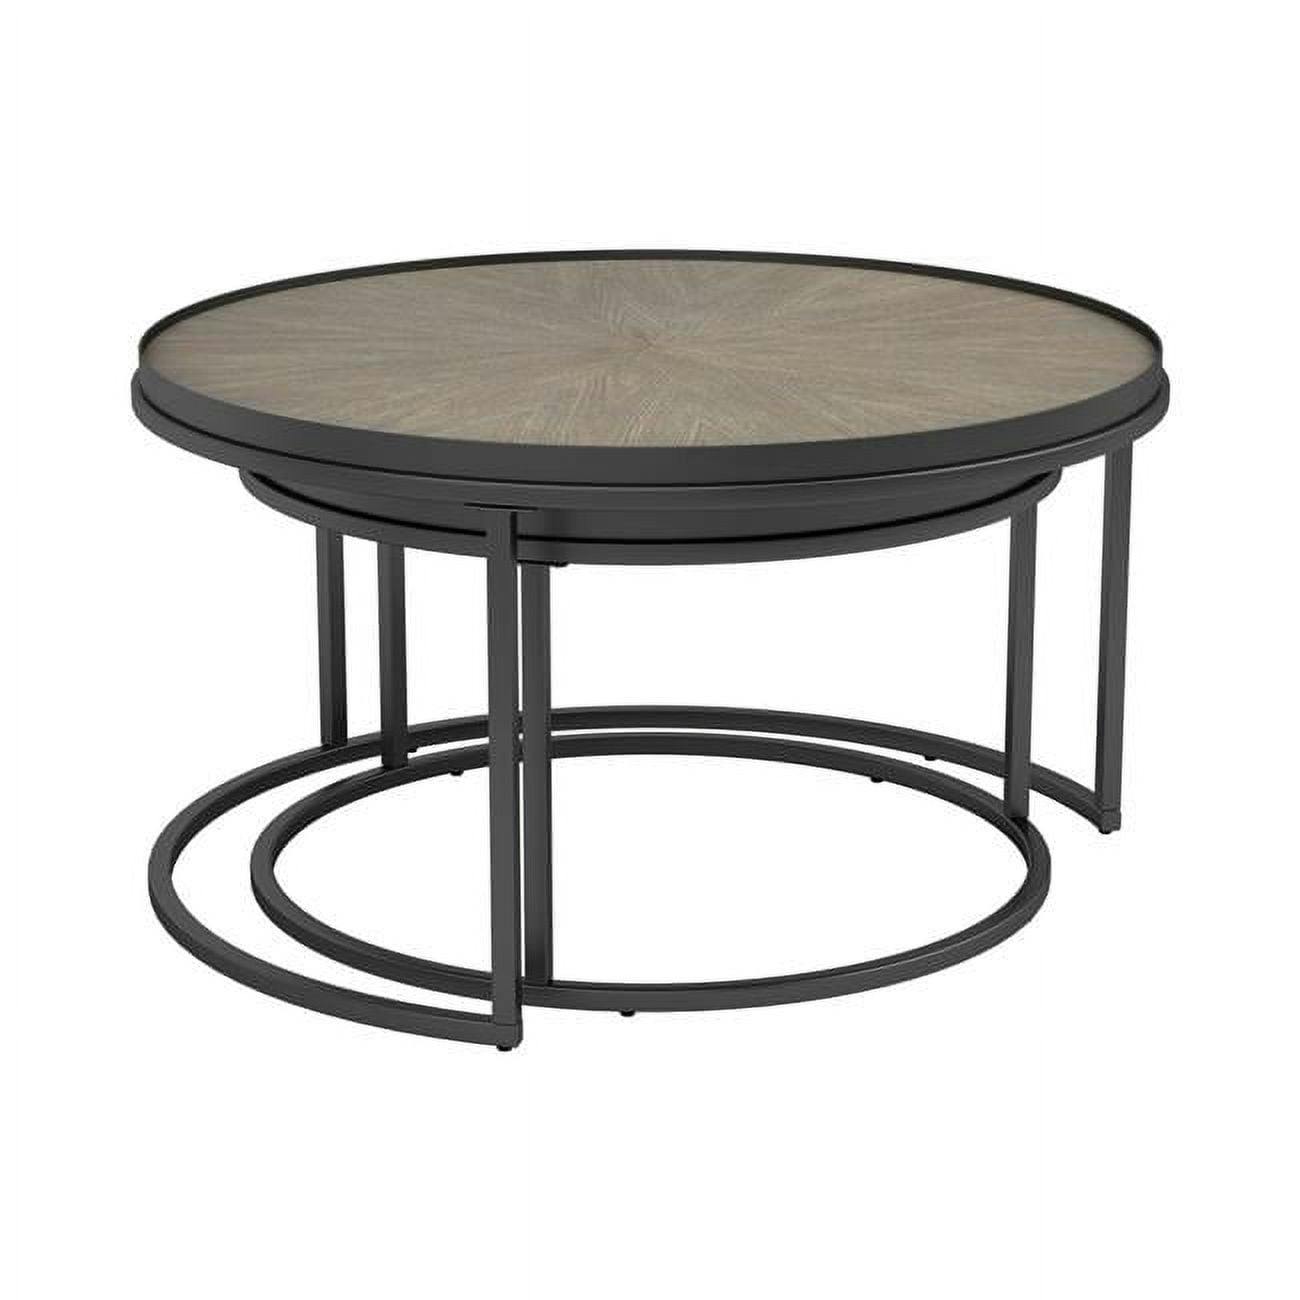 Round Elm Wood Top Nesting Tables with Metal Frame, 2 Piece Set